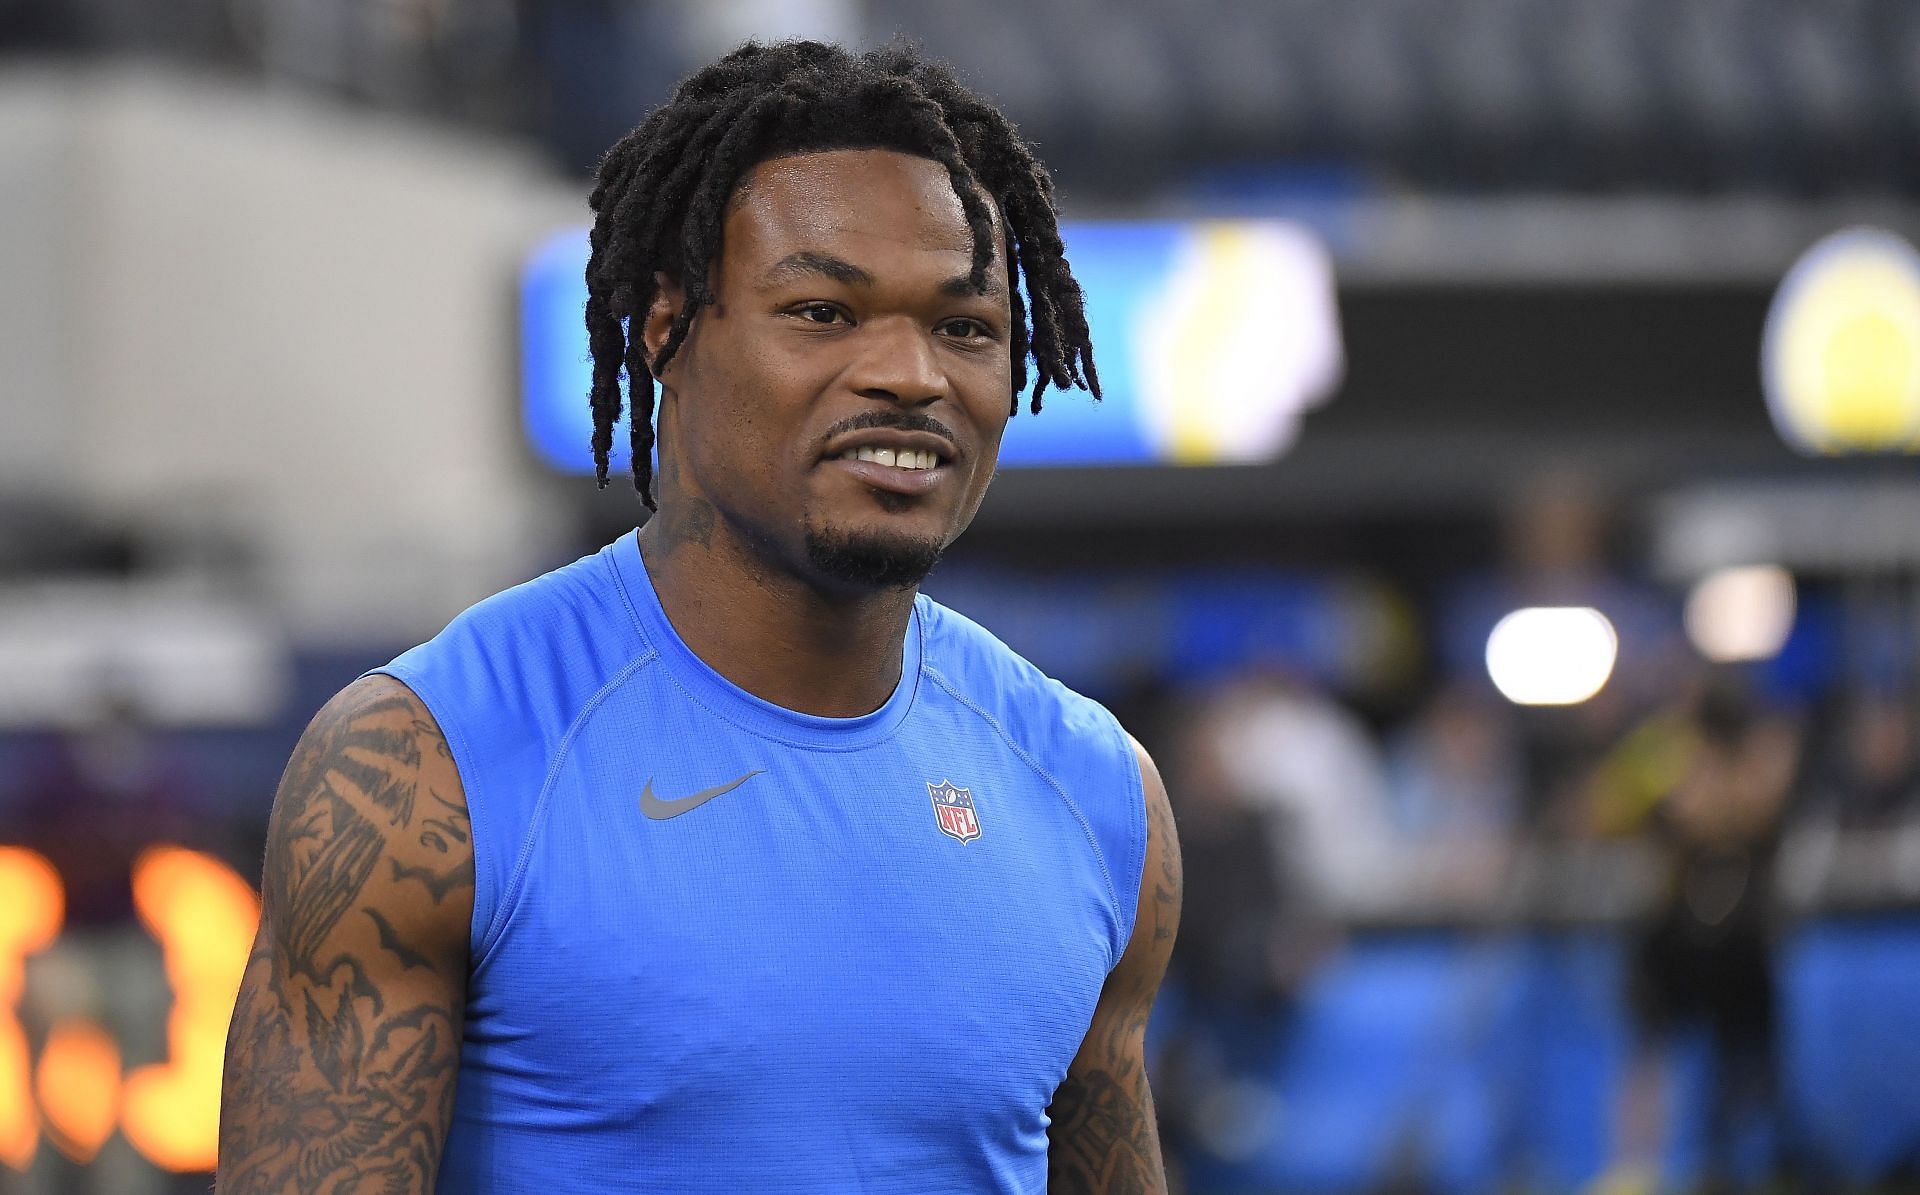 Derwin James signed a $76.5 million contract